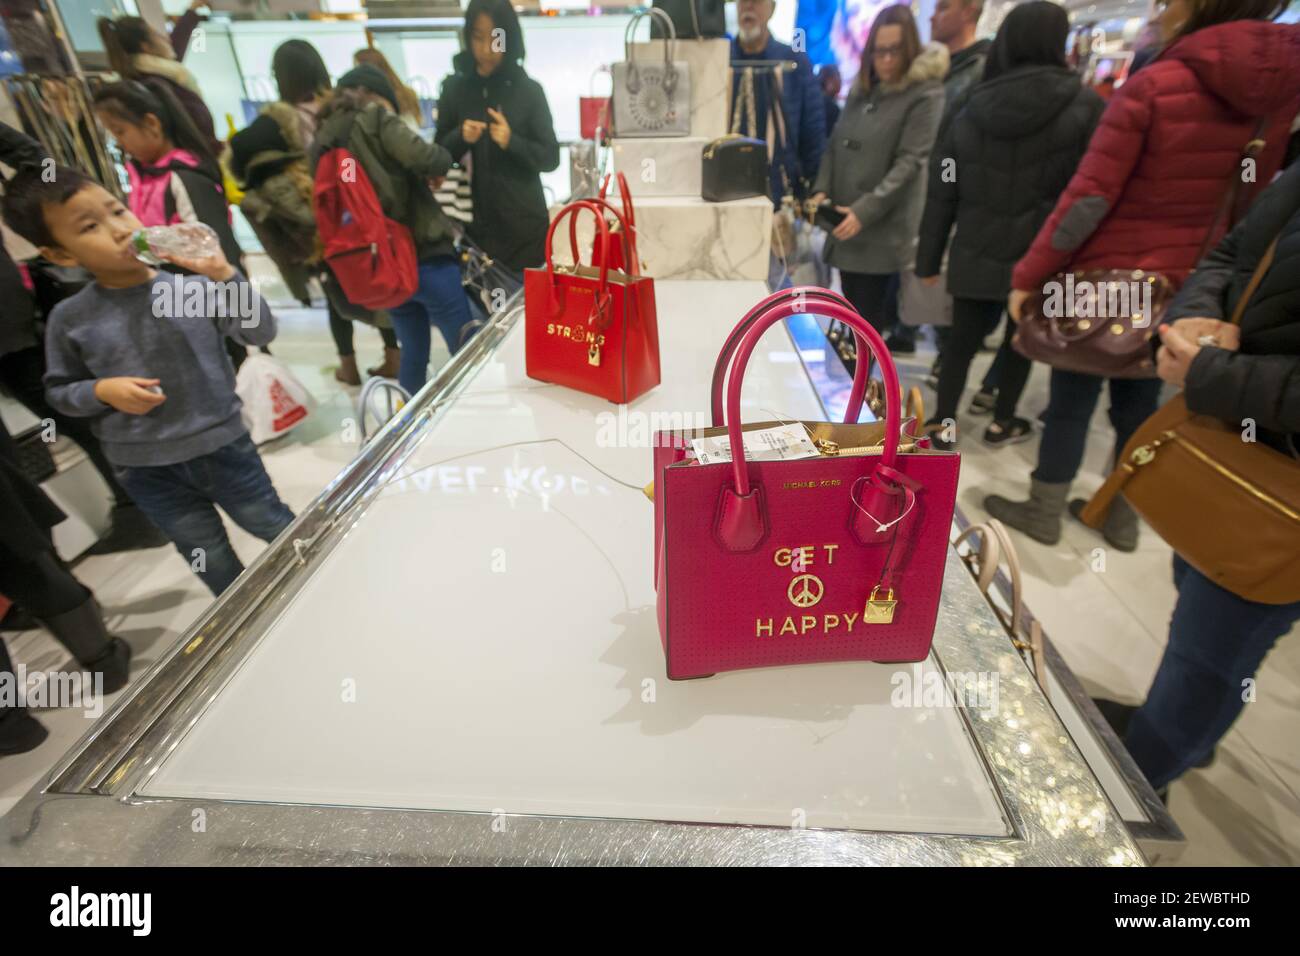 Tourists throng the Michael Kors display at Macy's Herald Square flagship  store in New York on the day after Thanksgiving, Black Friday, November 24,  2017. The tally of foreign visitors to the